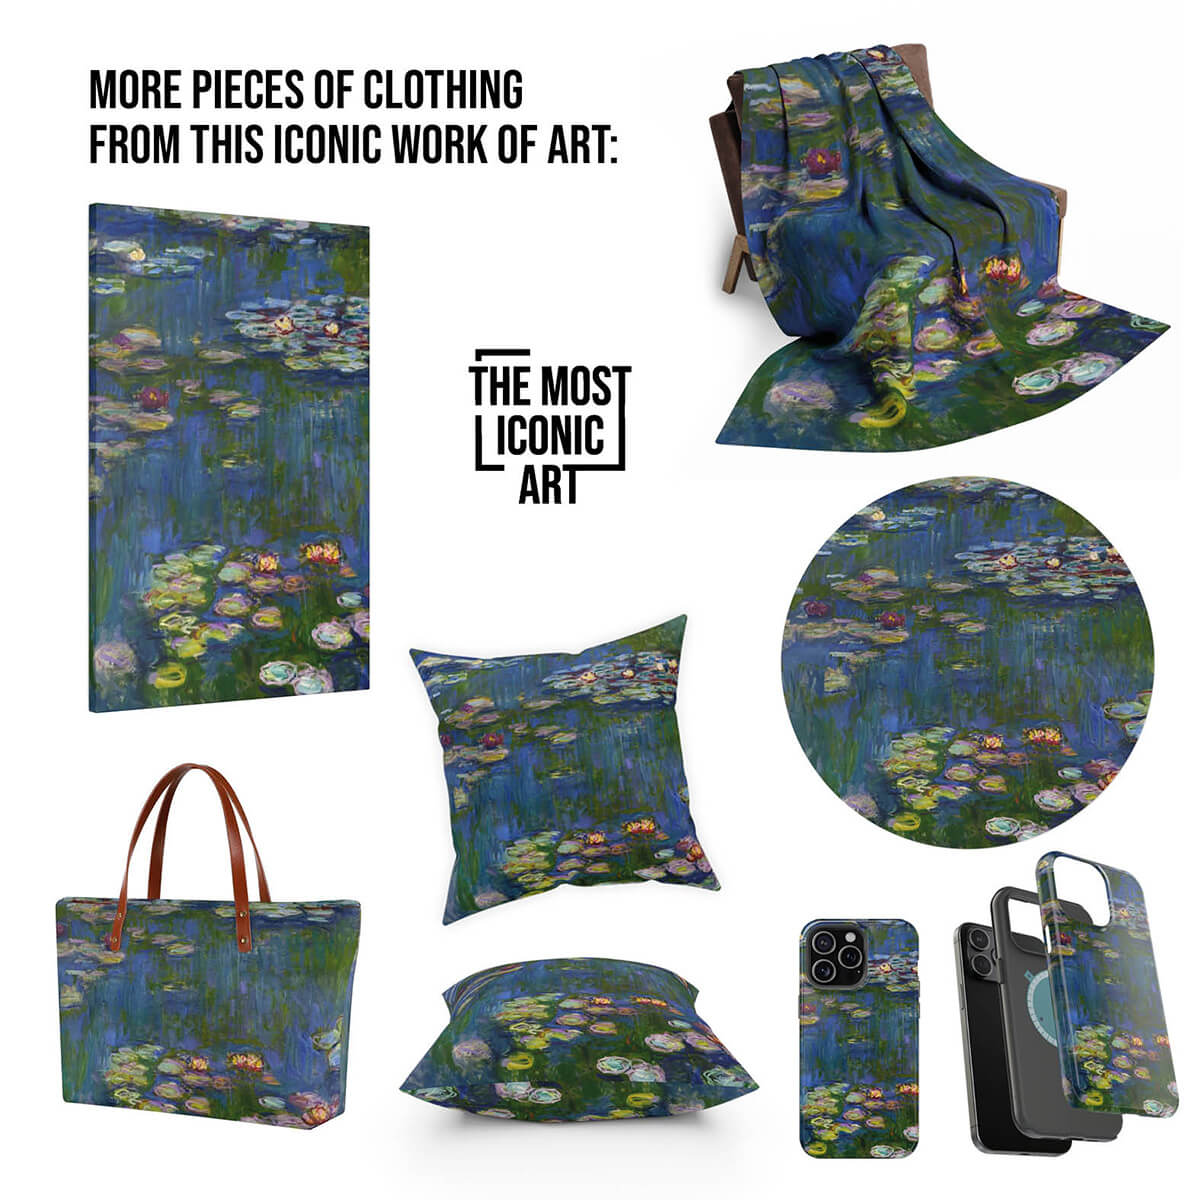 Exquisite lapel shirt dress inspired by Claude Monet's "Water Lilies"